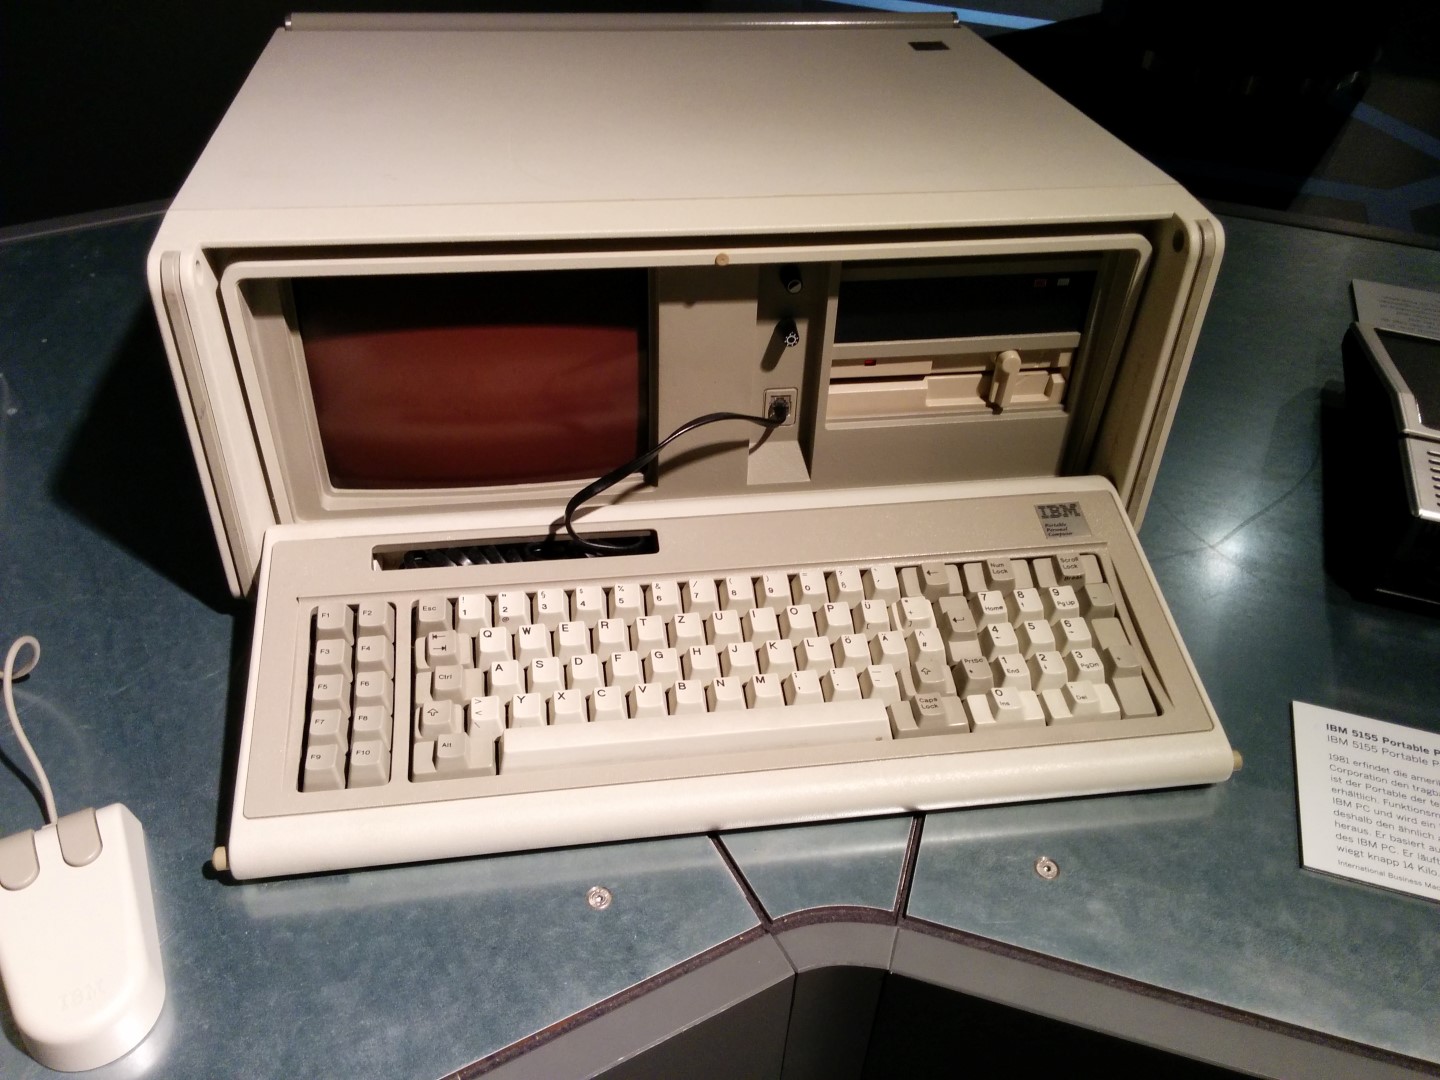 The portable I still want (for its keyboard).